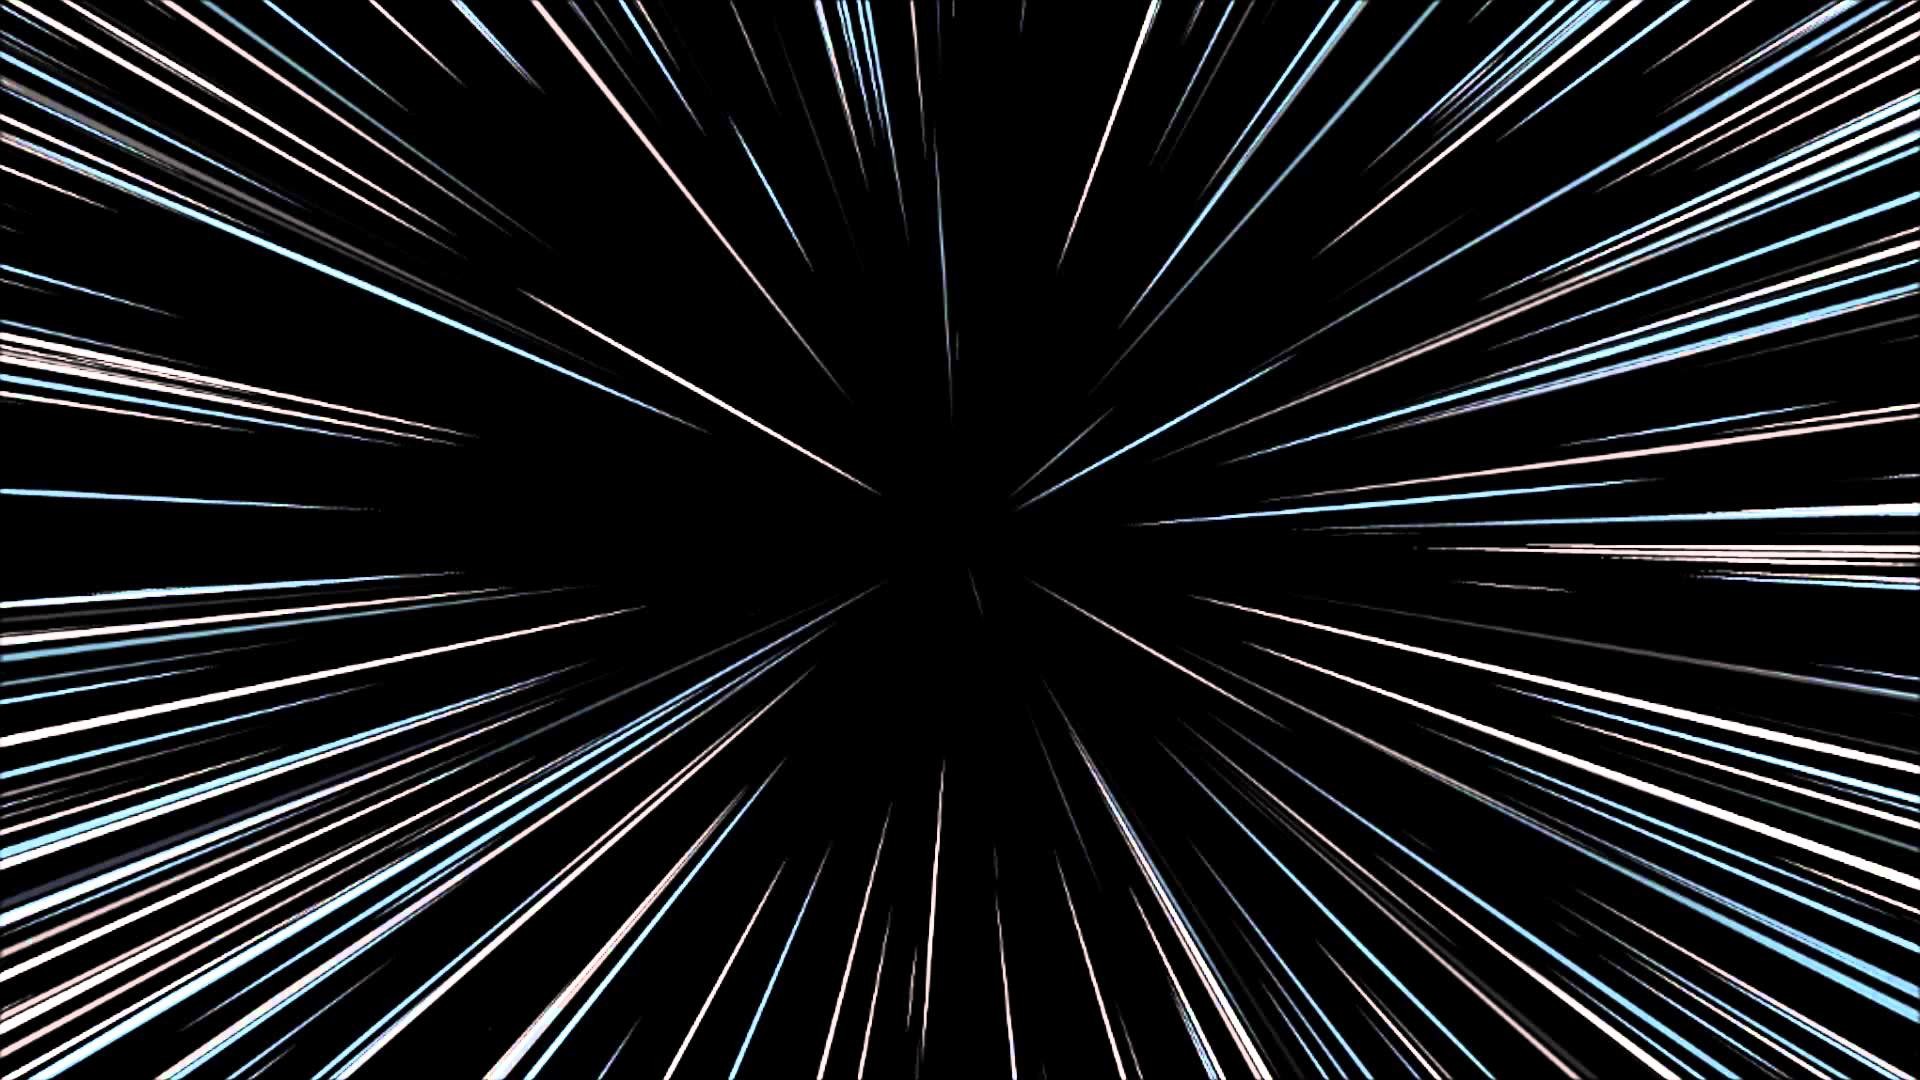 Star wars jump to lightspeed in reverse as viewed from rear of